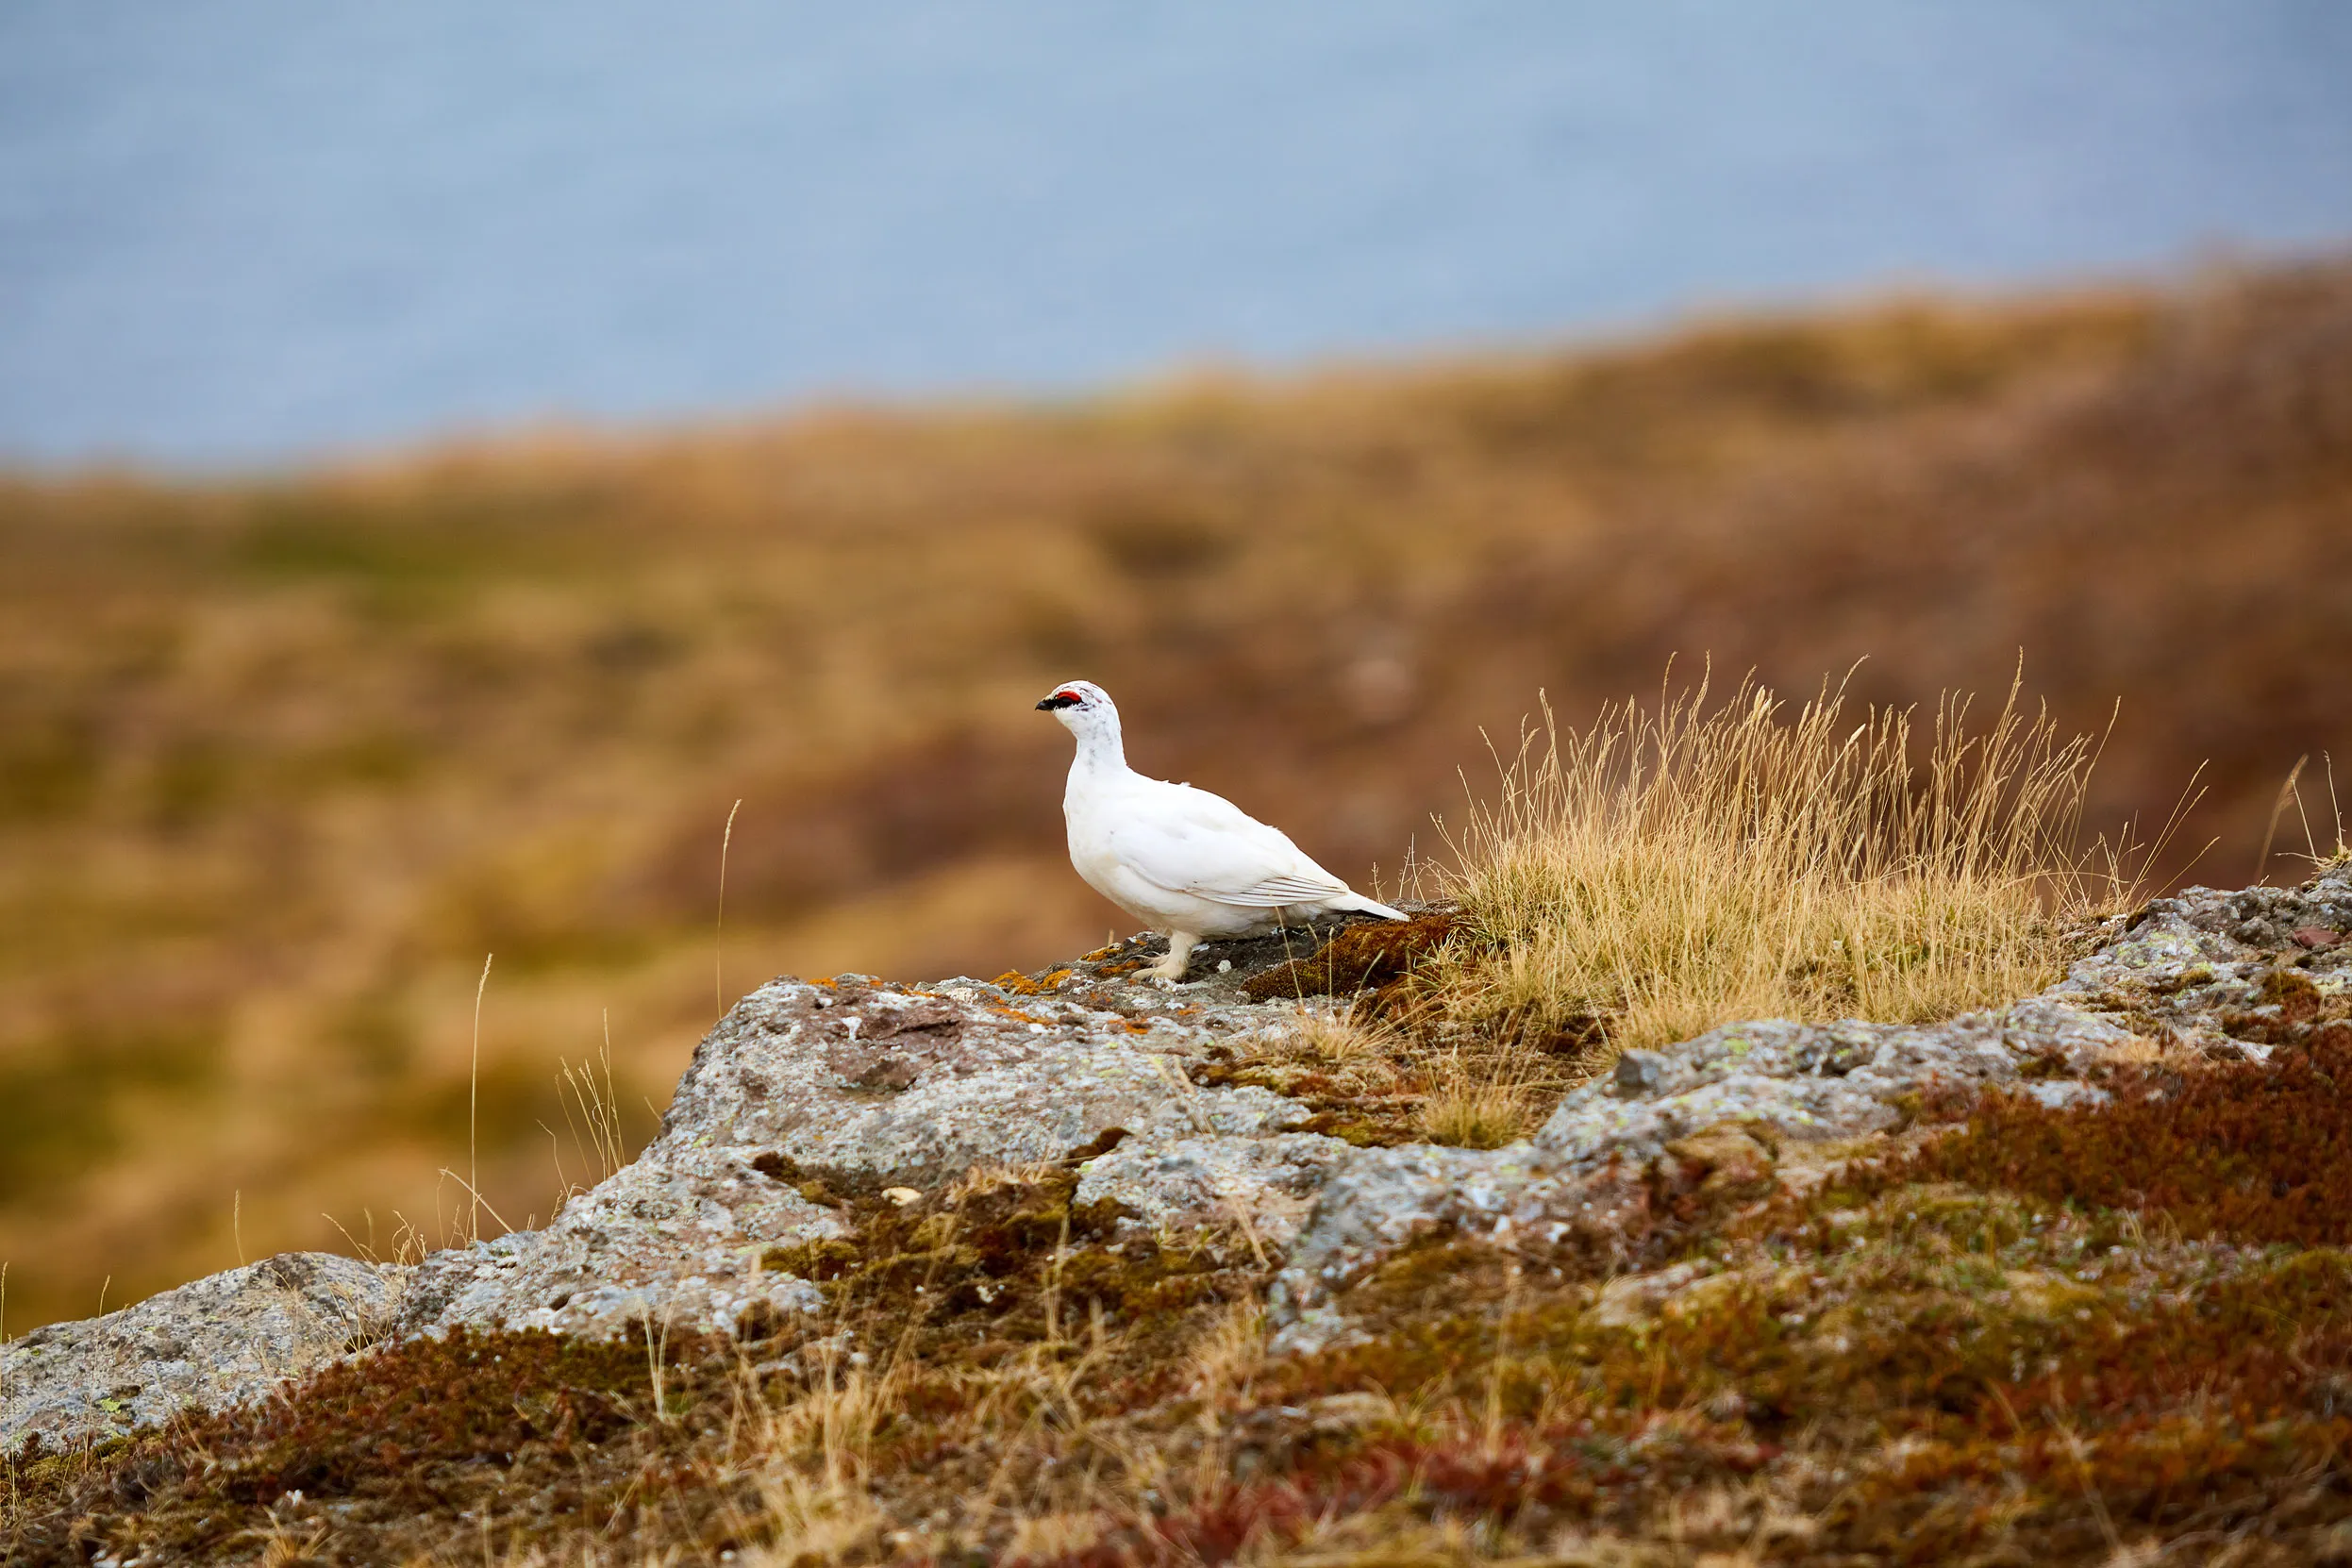 A lone Ptarmigan perched on a rock surrounded by dried grassland.